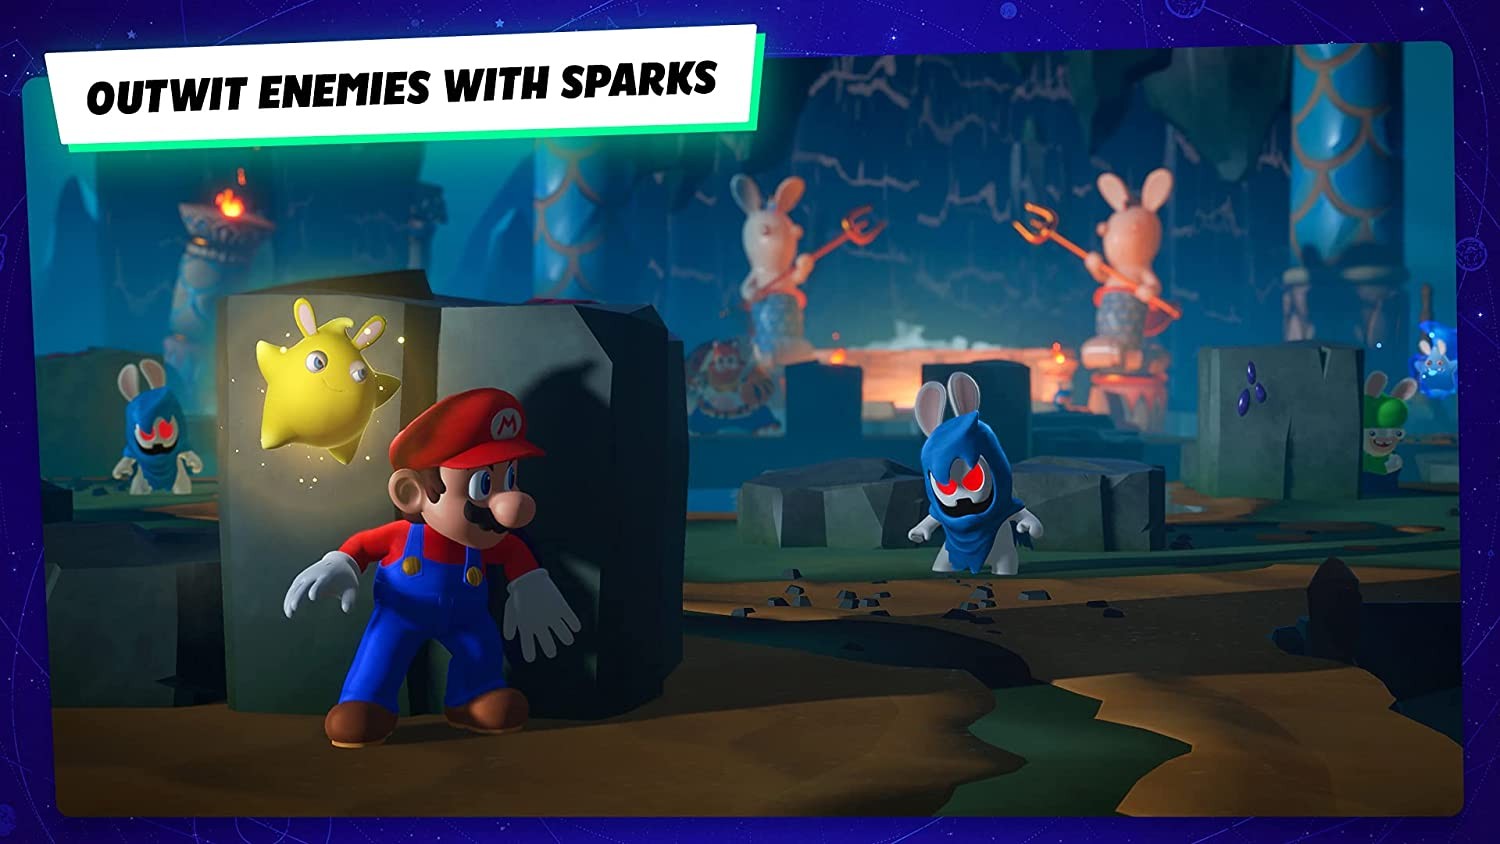 Mario & Rabbids Sparks of Hope